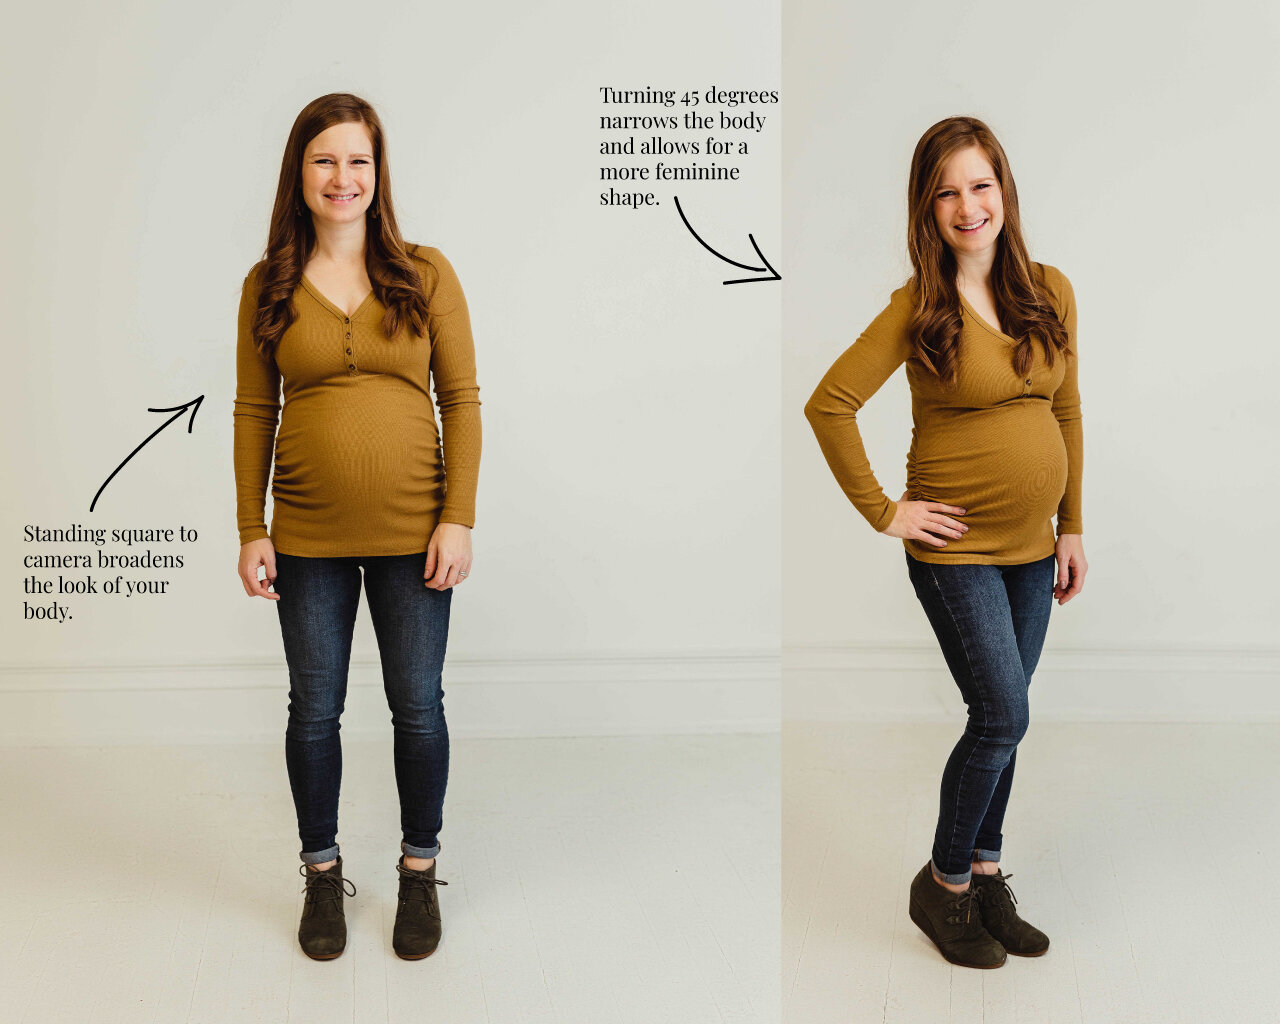 professional posing tips for photos, pregnancy photography posing tips, how to pose when pregnant